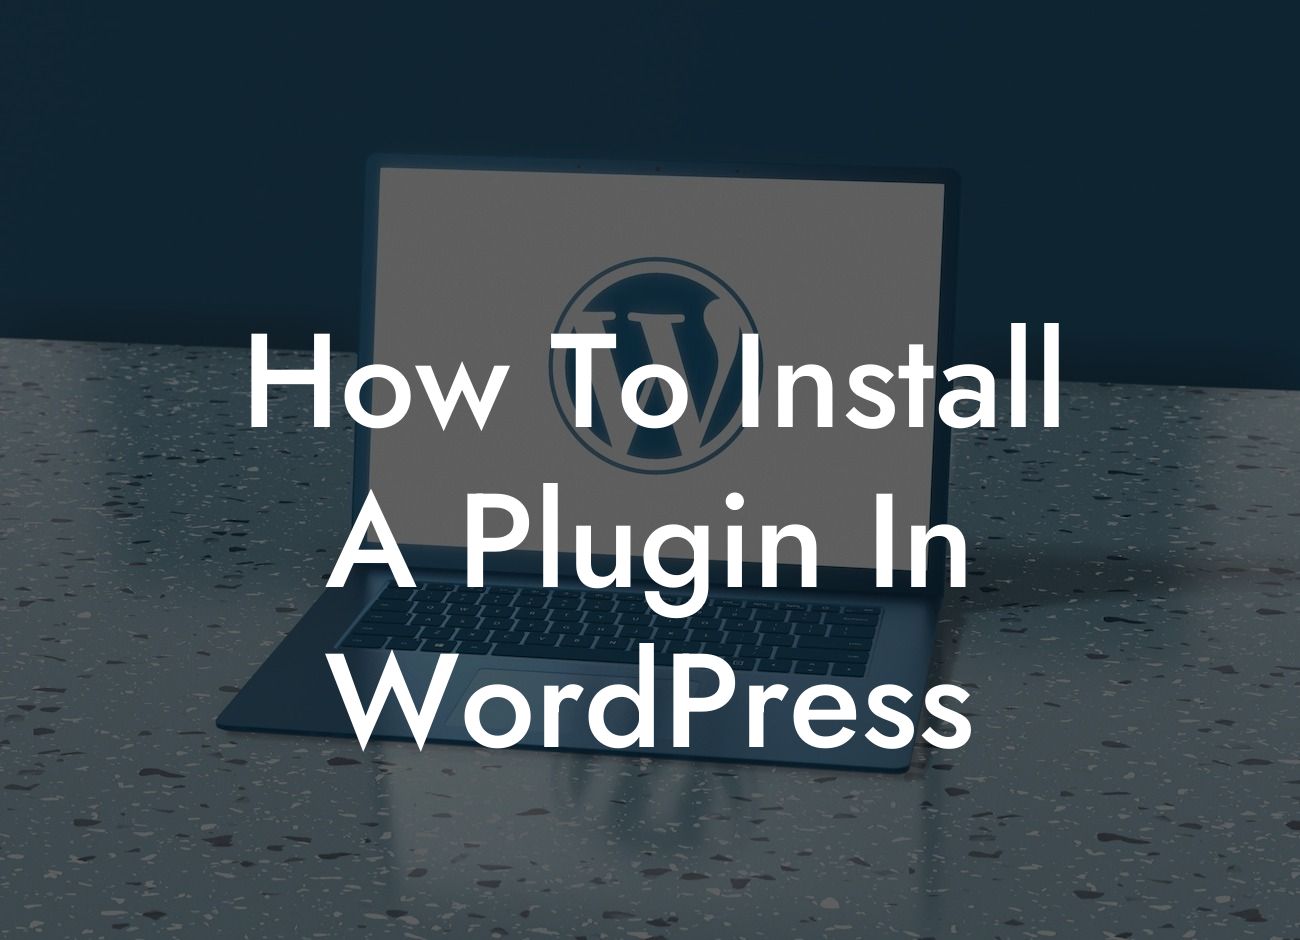 How To Install A Plugin In WordPress